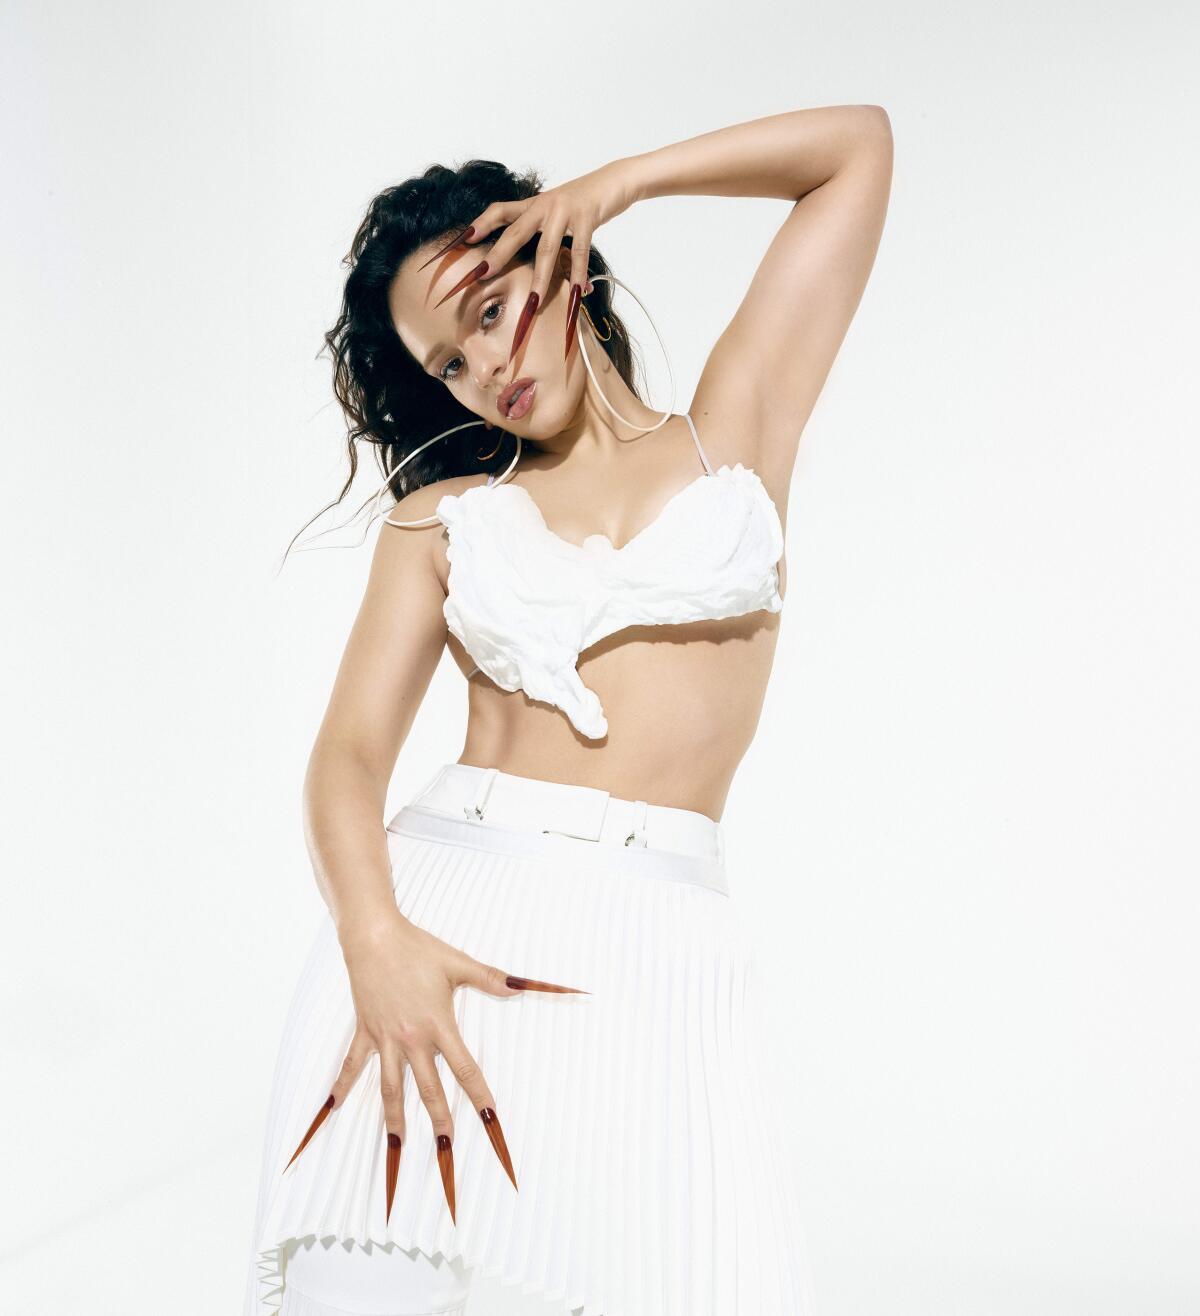 A woman with long sharp fingernails poses in a skimpy white top and skirt 